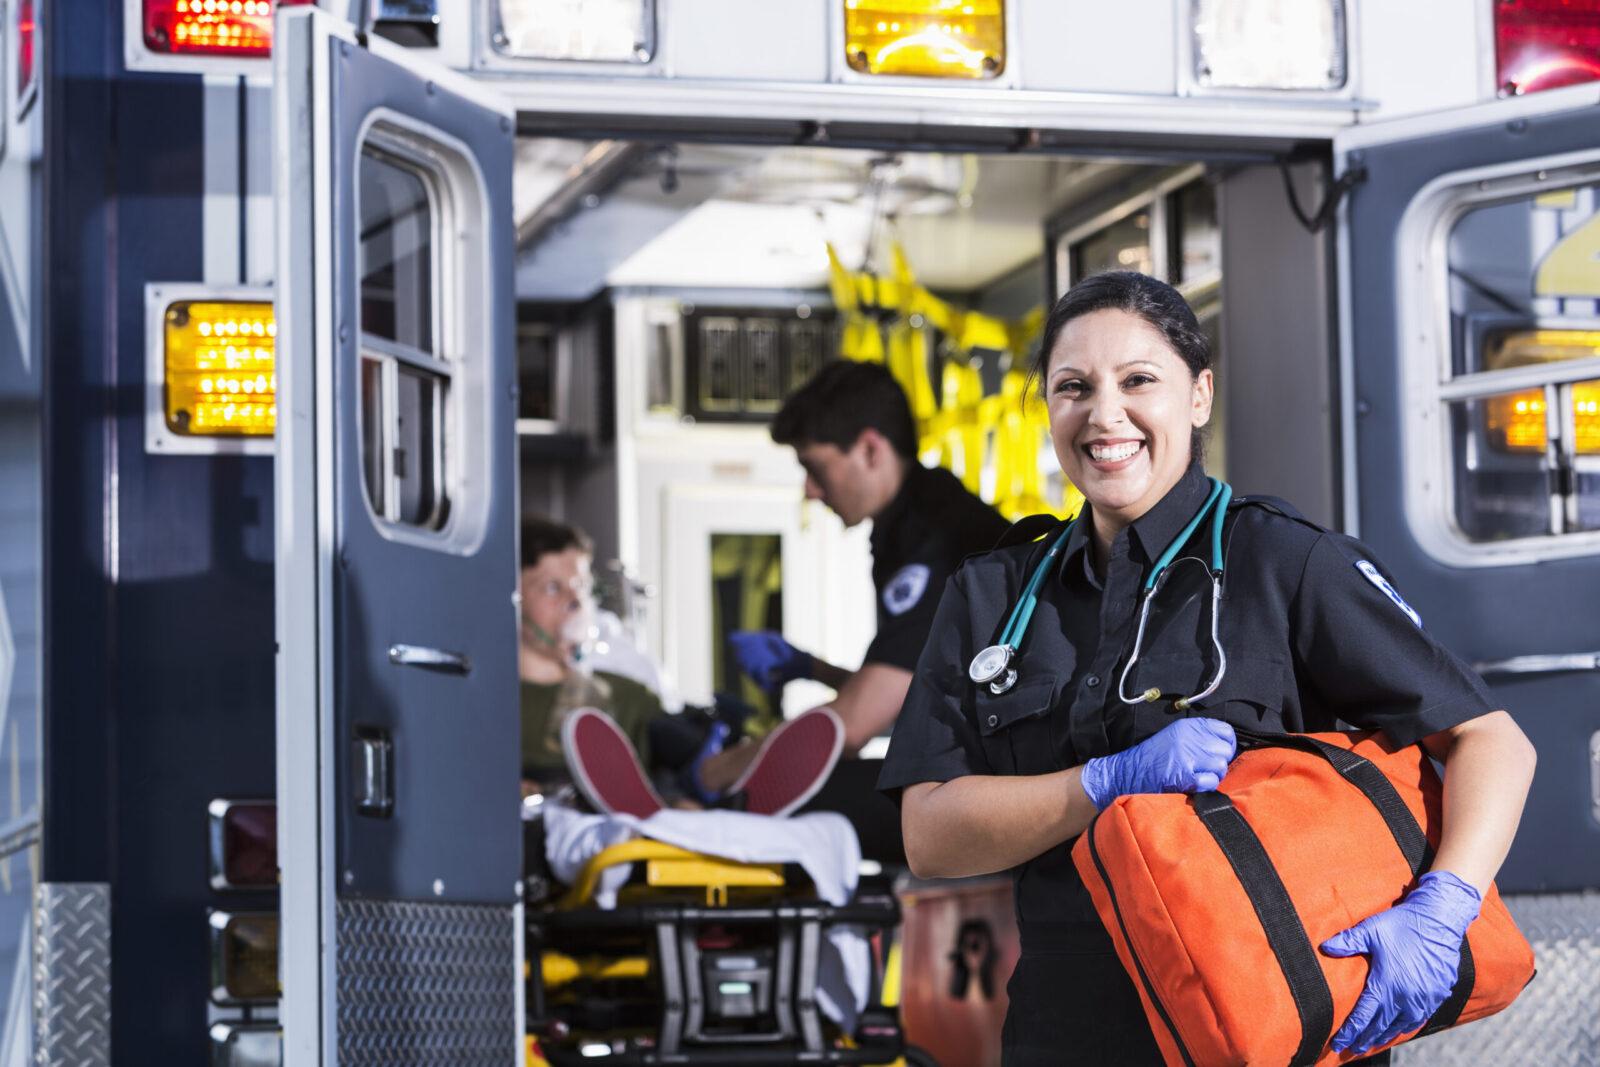 How To Become An EMT – General Info